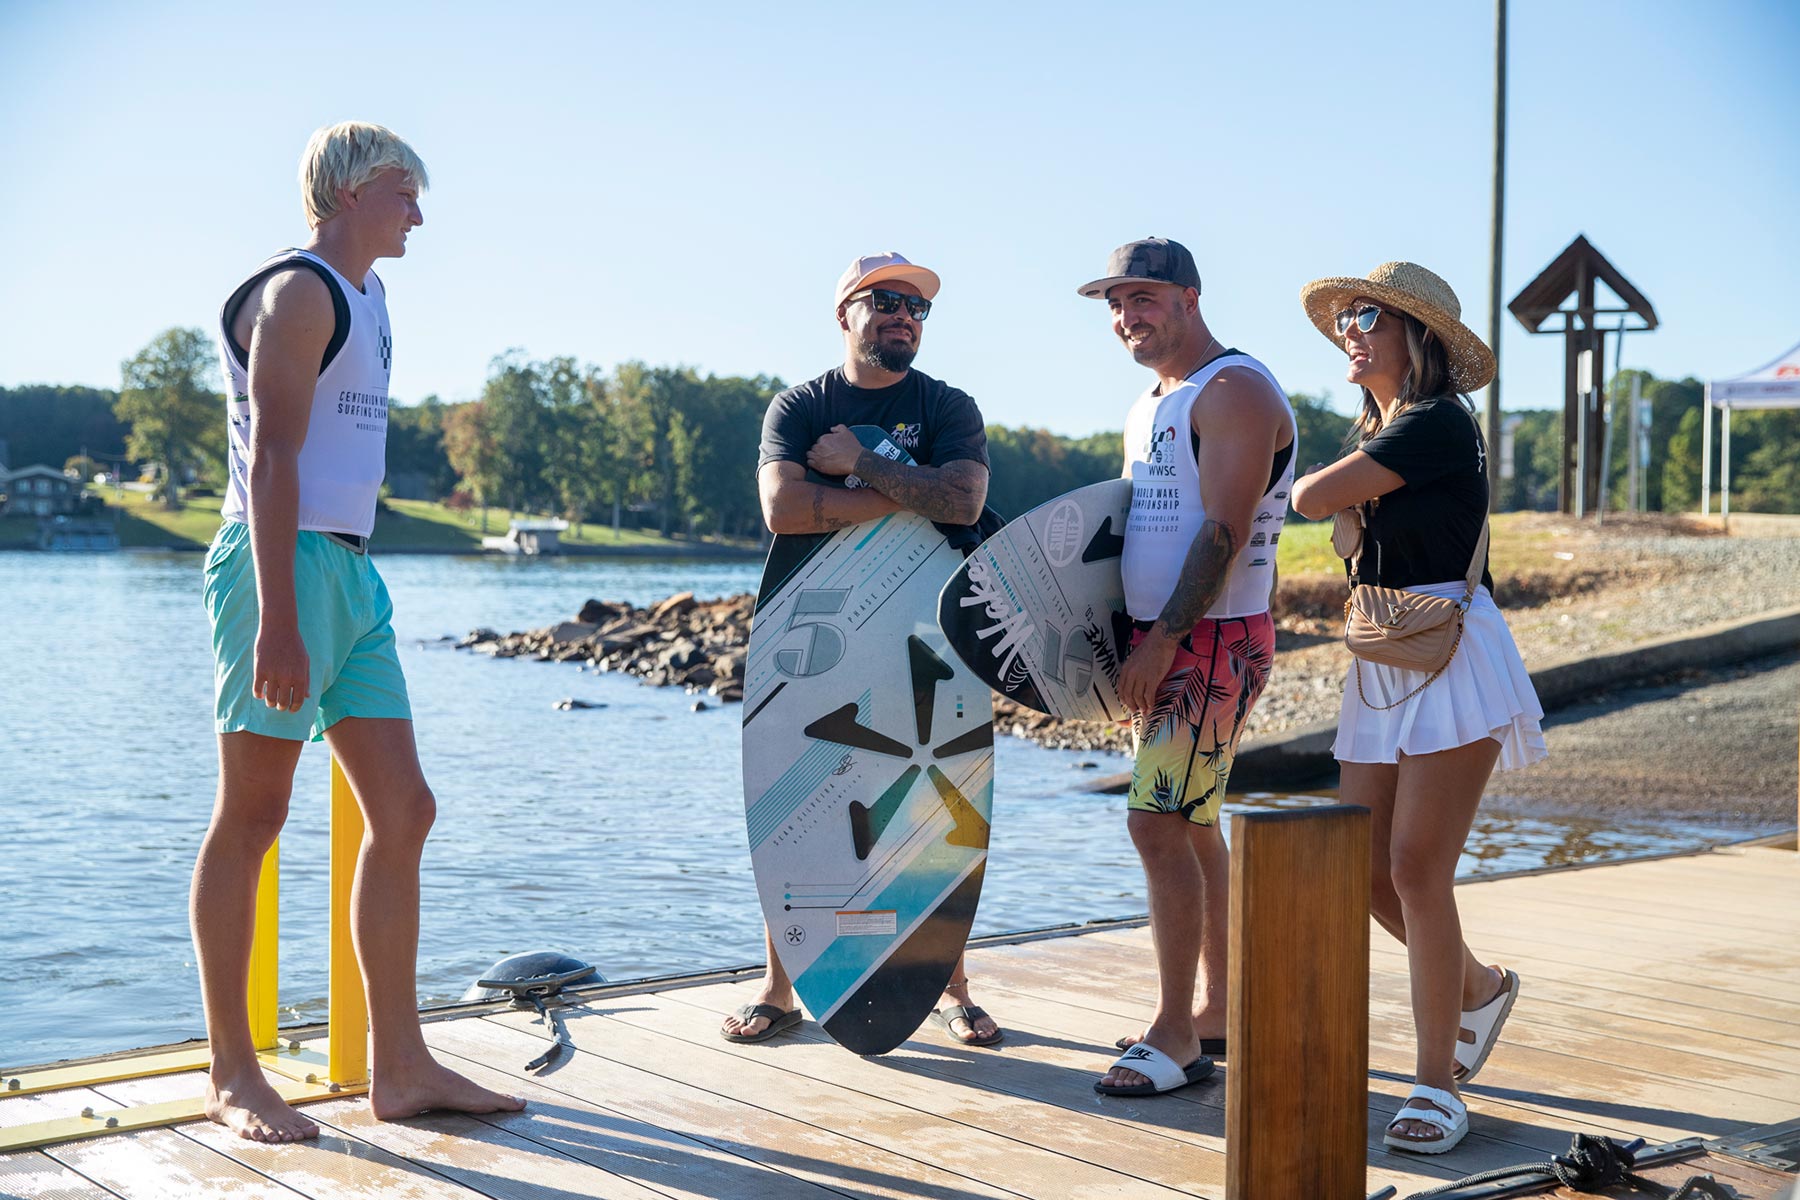 A group of surfers standing on a dock in a surfing contest.